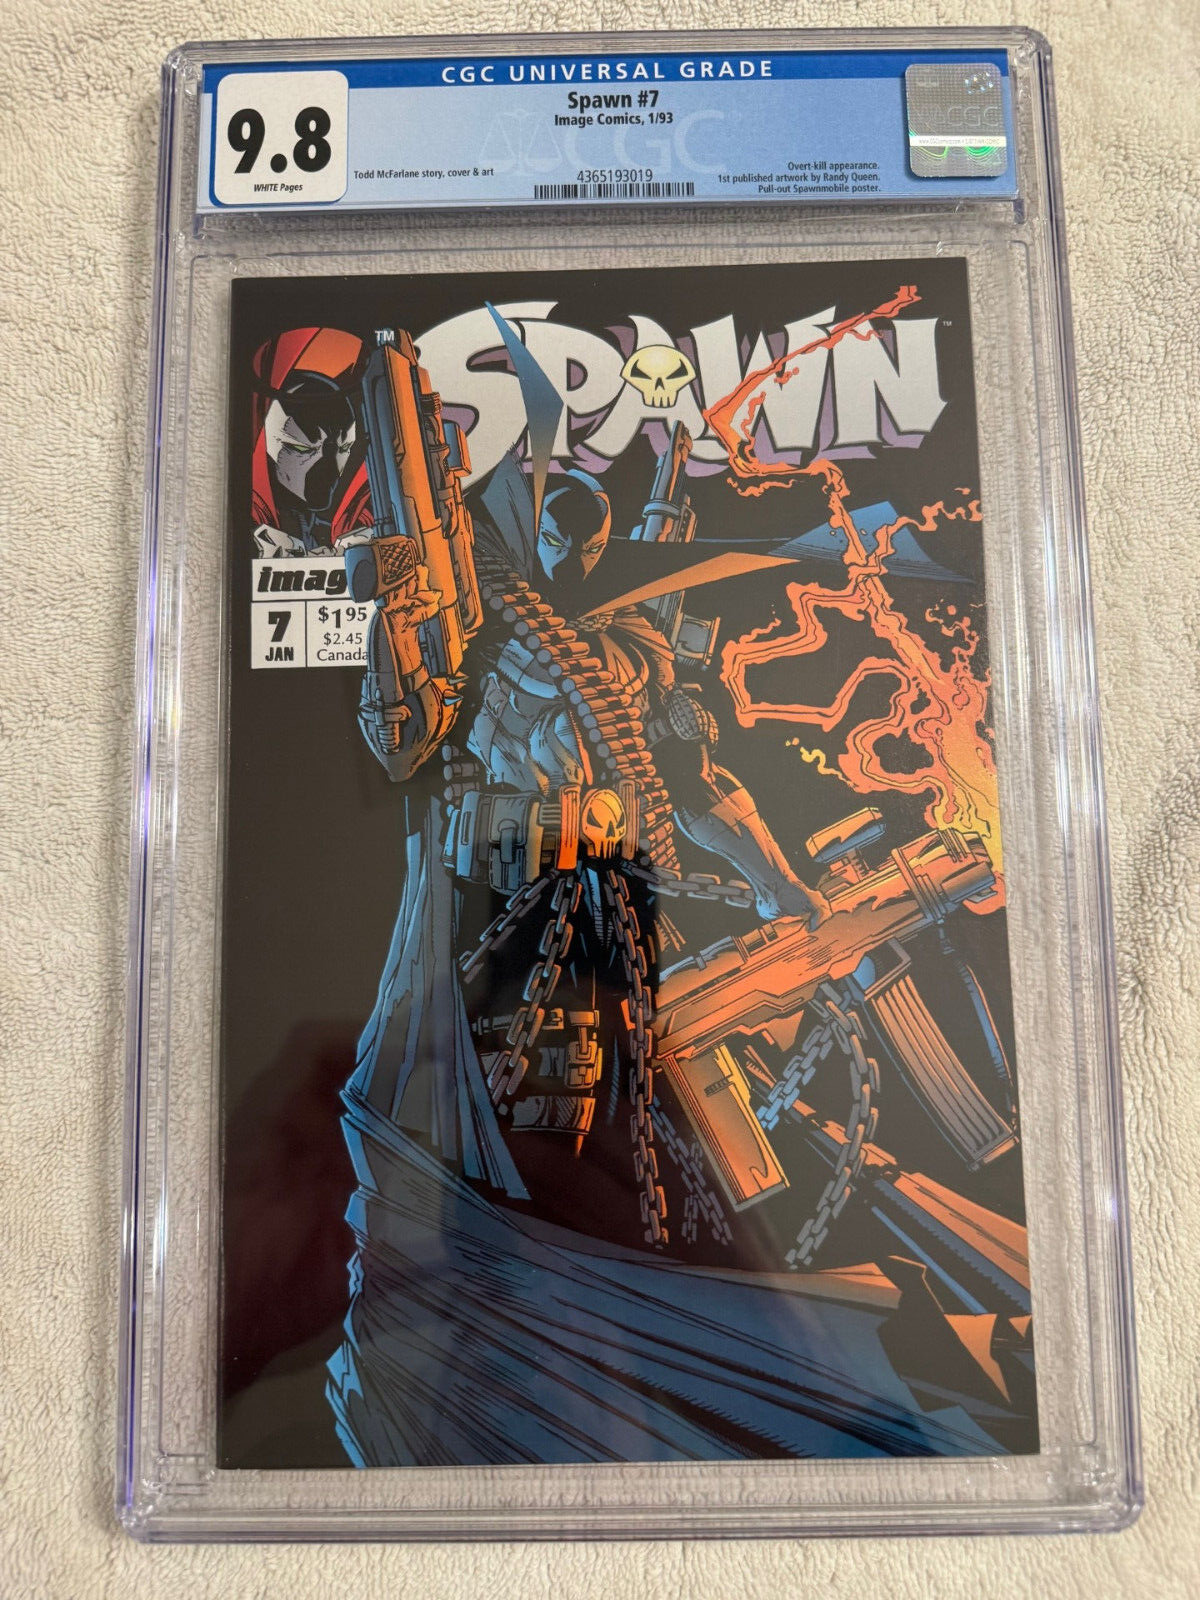 Spawn #7 - CGC 9.8 - White Pages - Image 1993